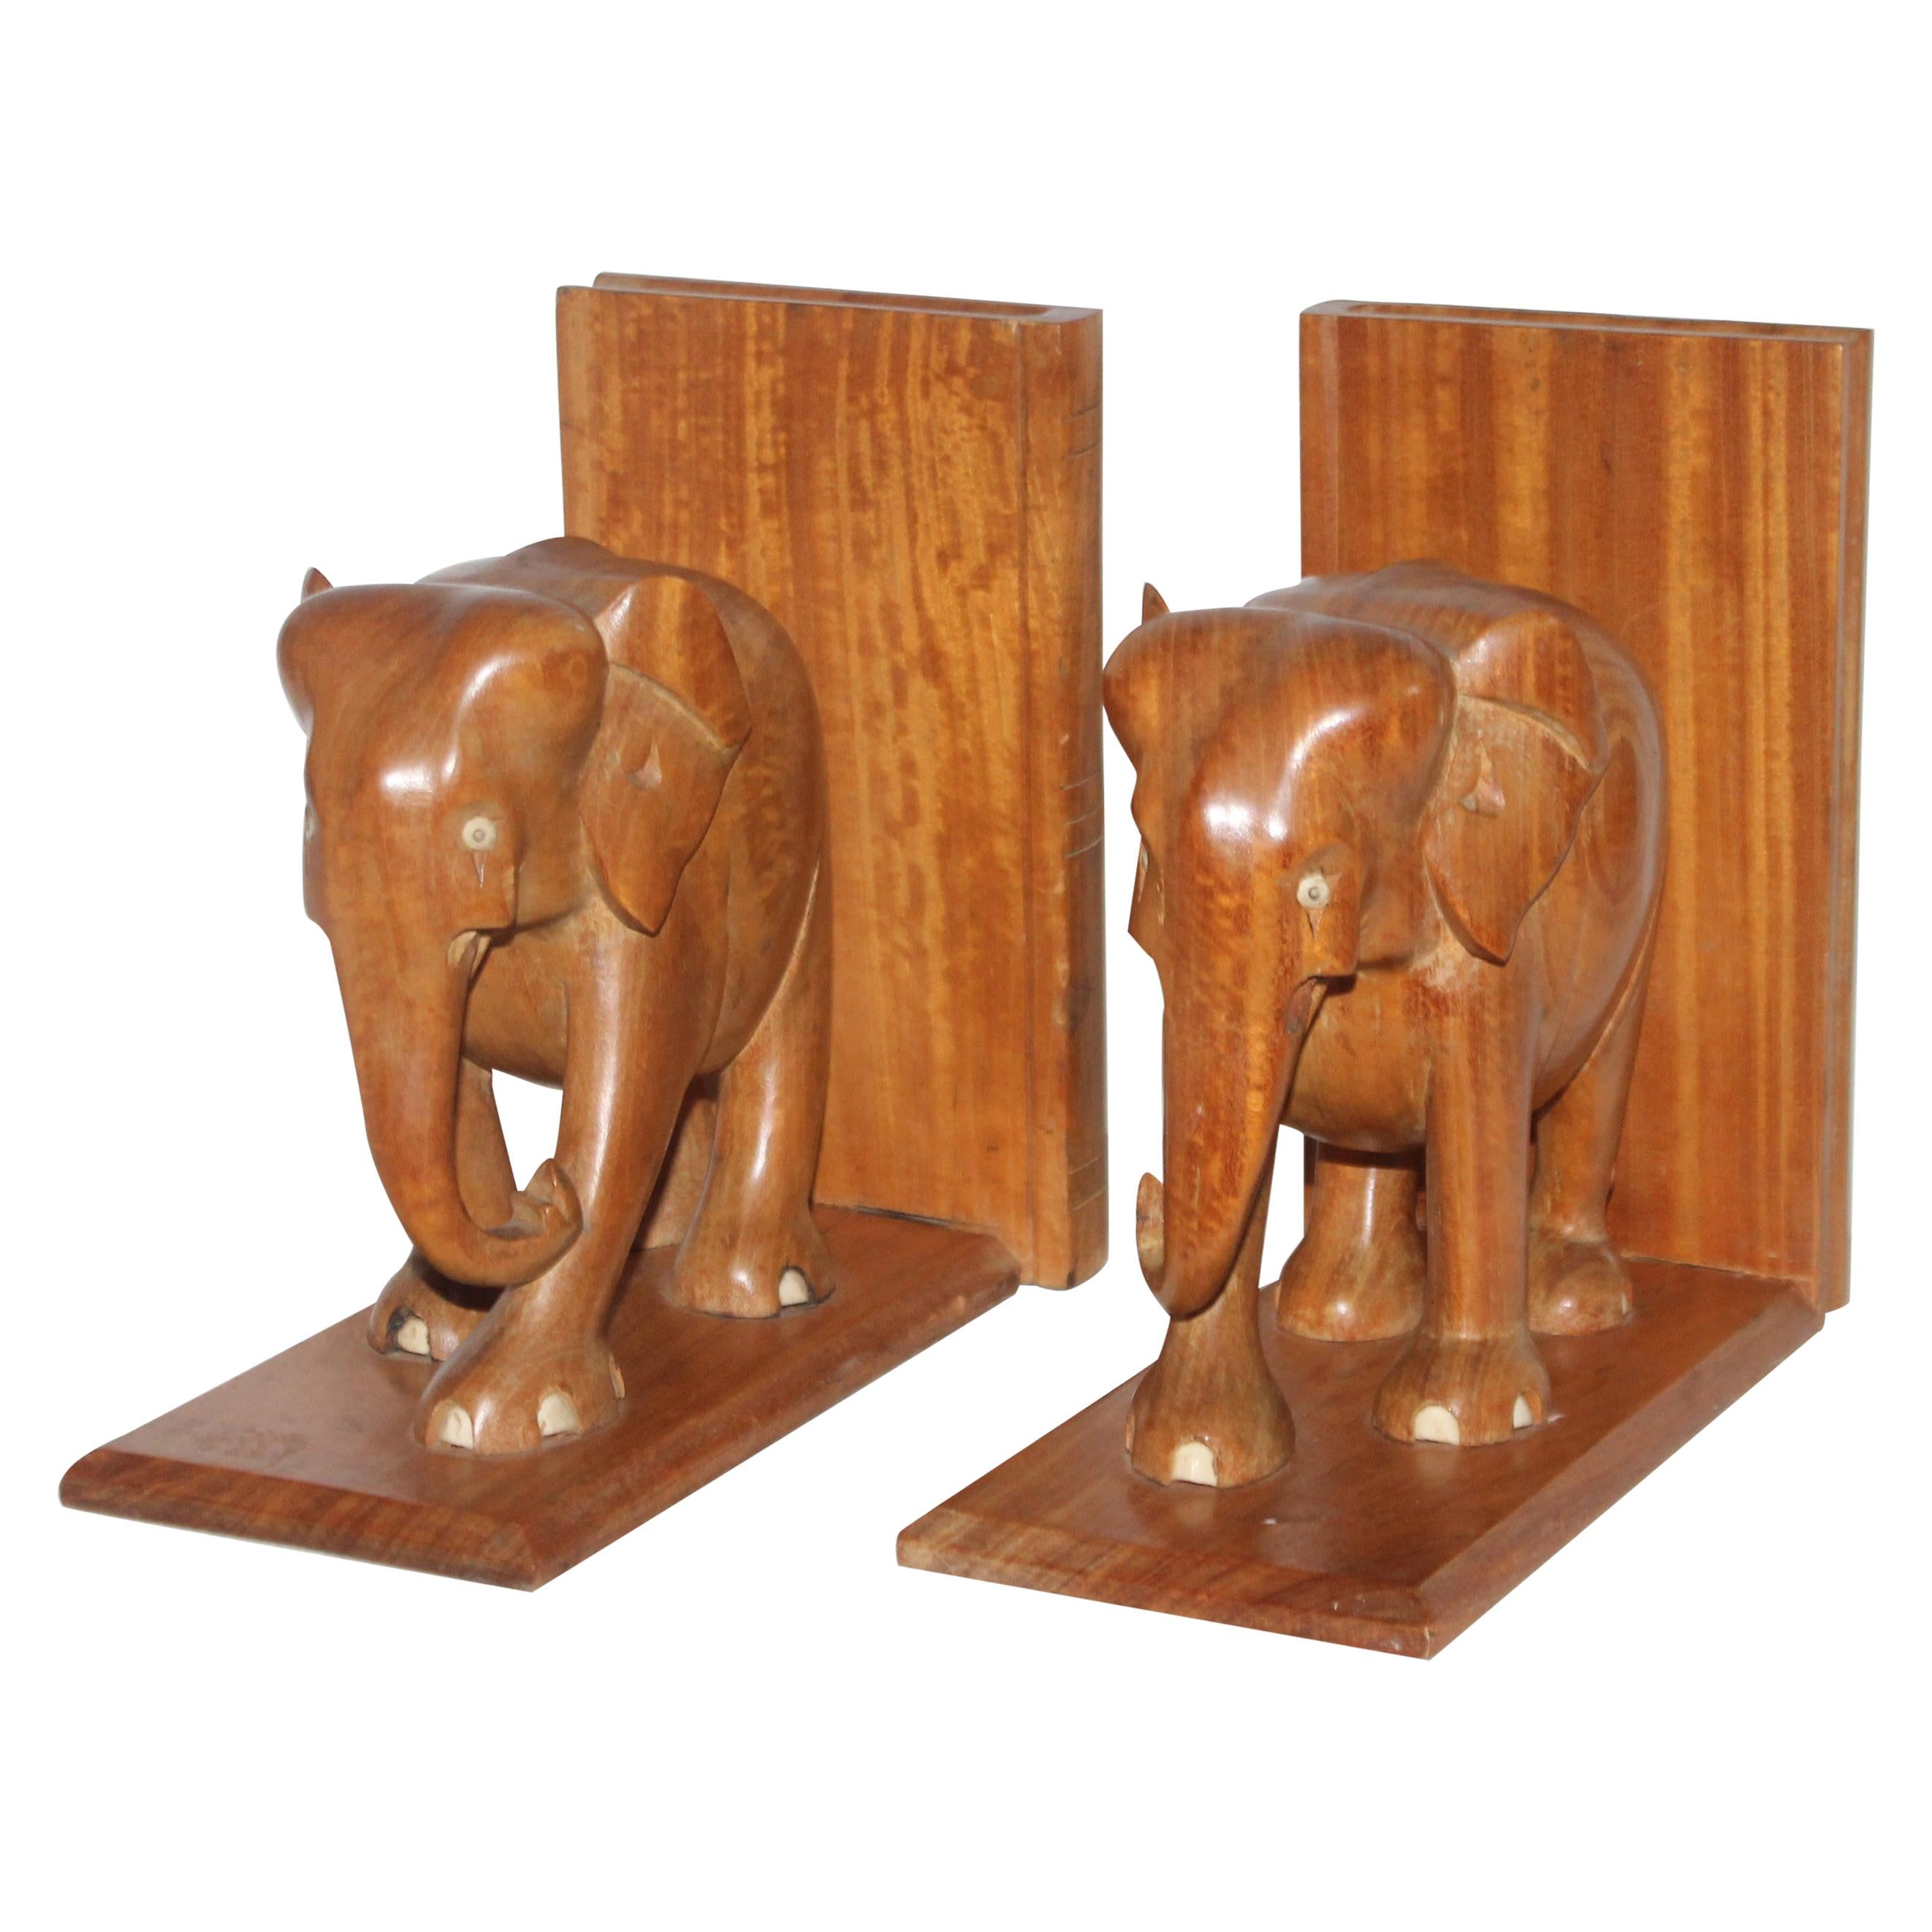 Hand Carved Elephants Bookends, Pair